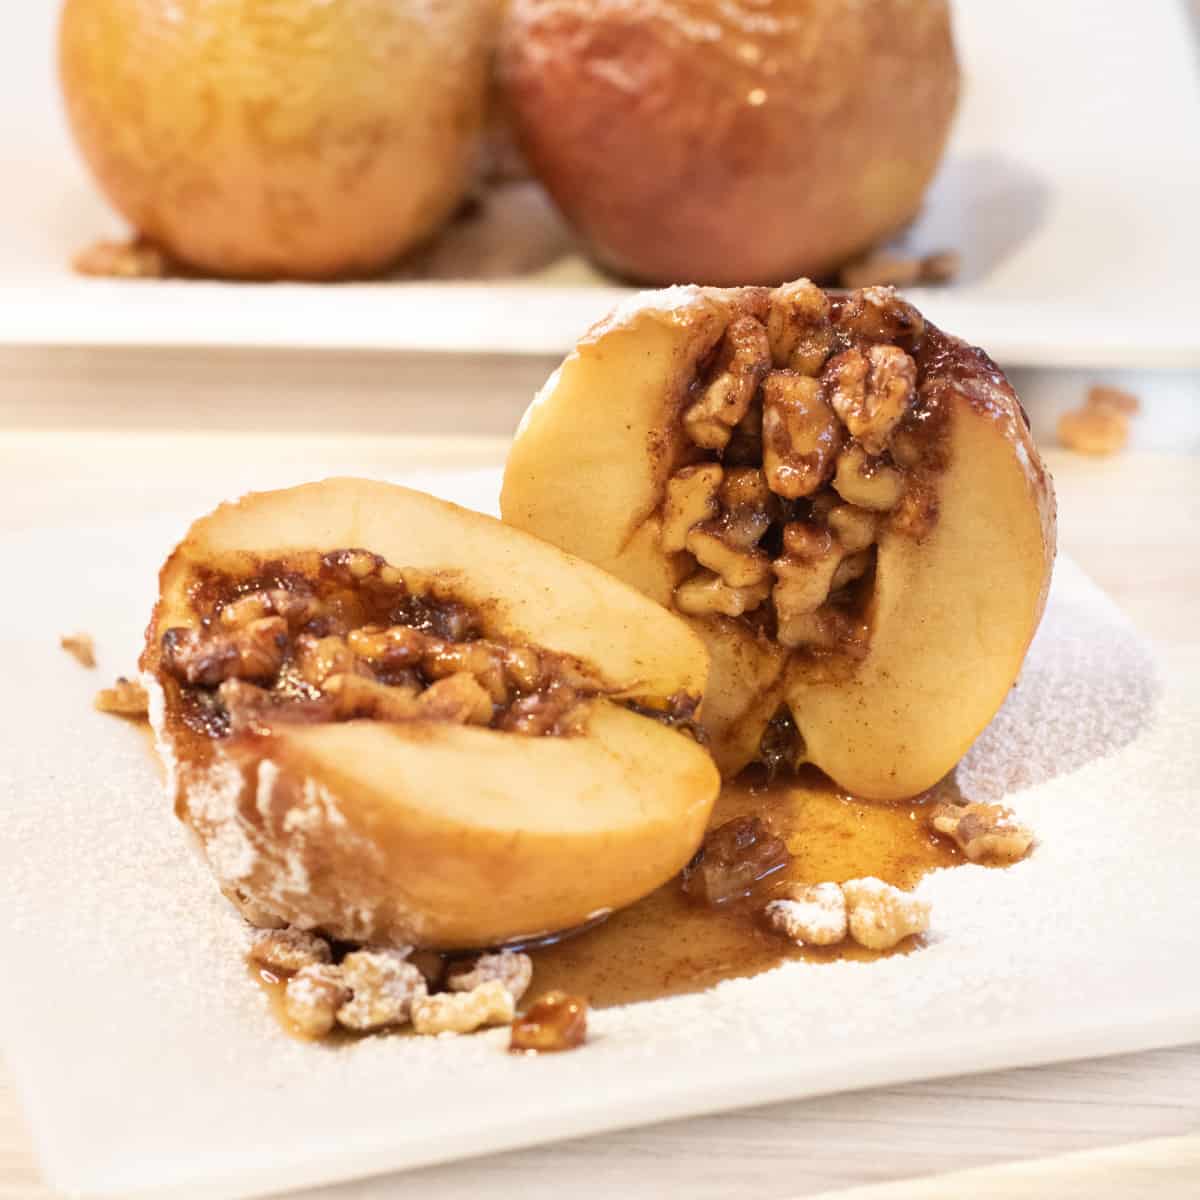 a halved baked apple with walnuts inside on a plate.